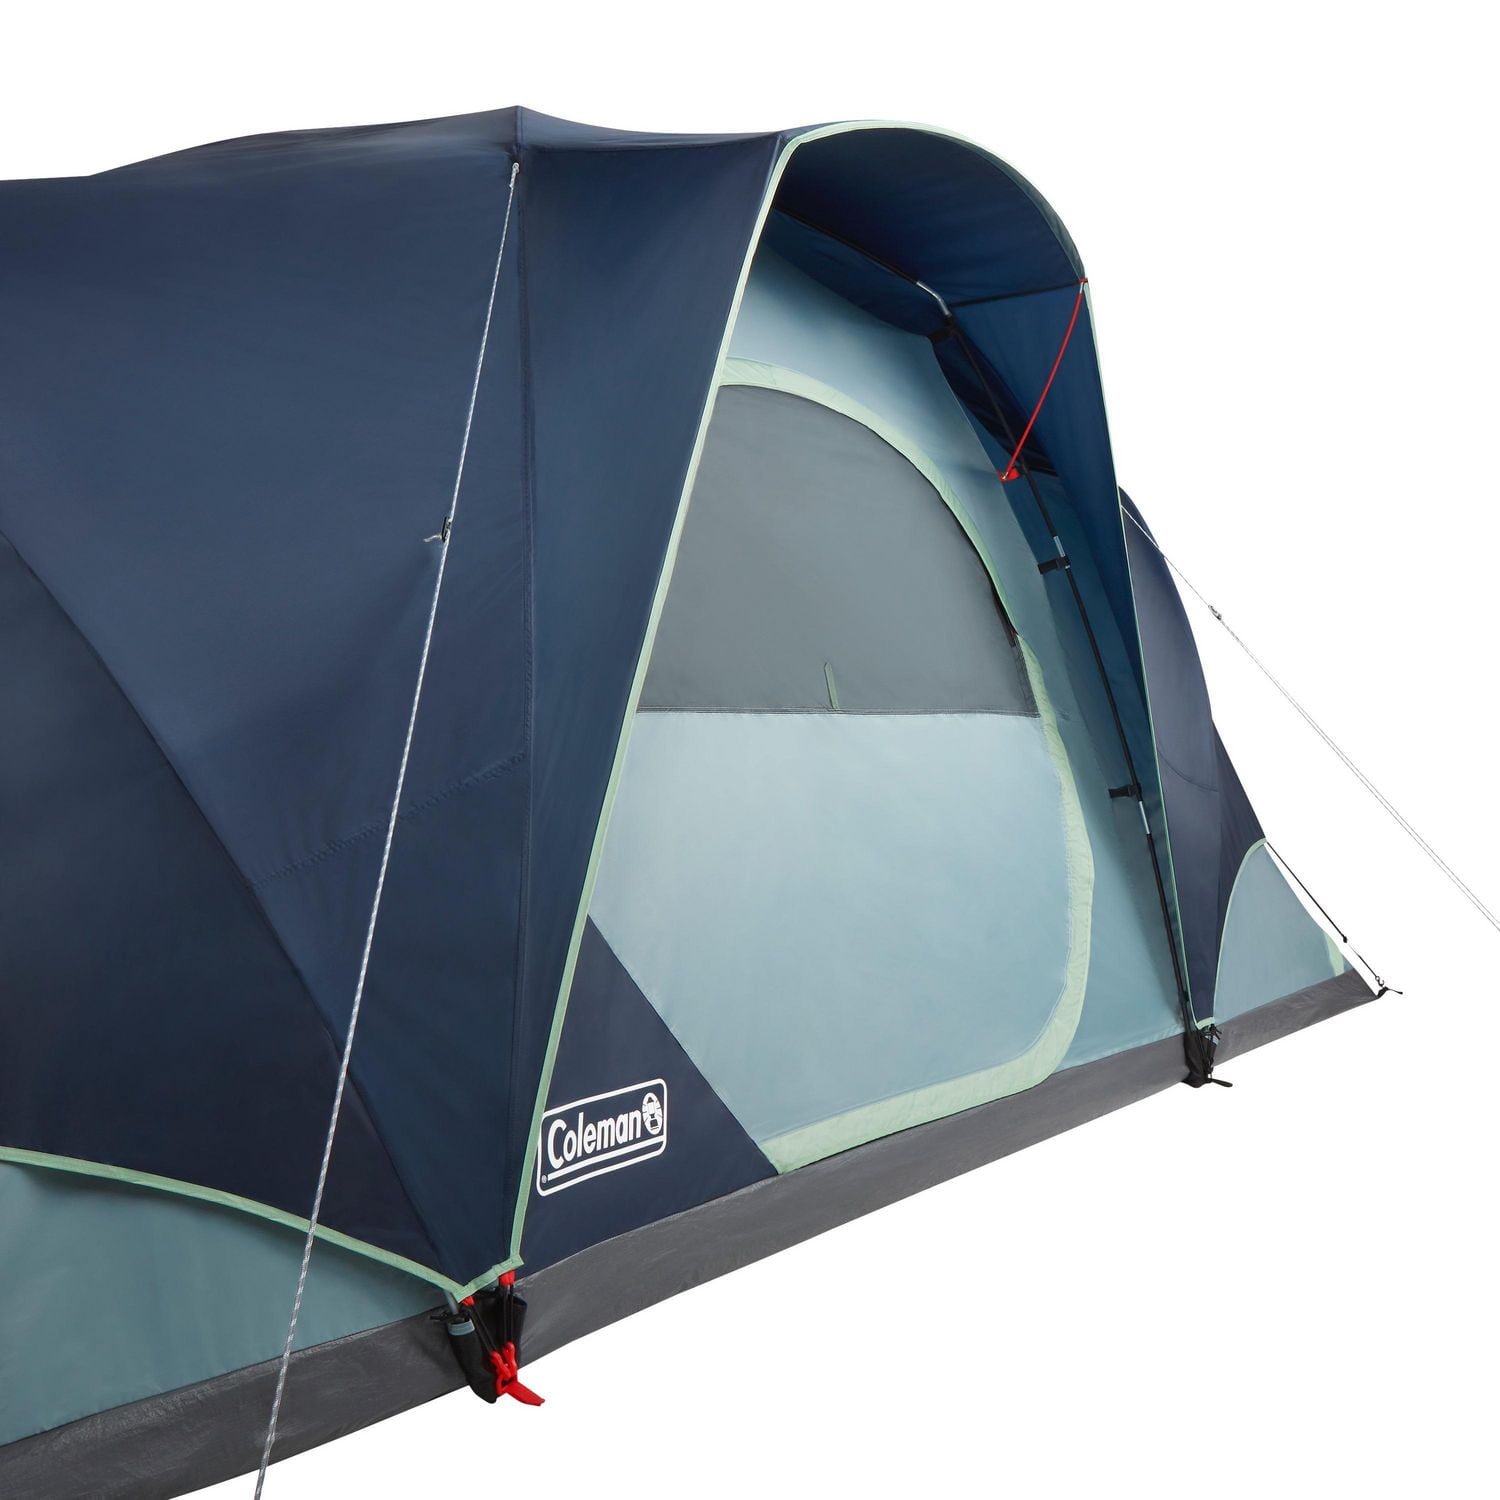 Coleman Skydome 8-Person Camping Tent, 12 x 13.5 ft. 